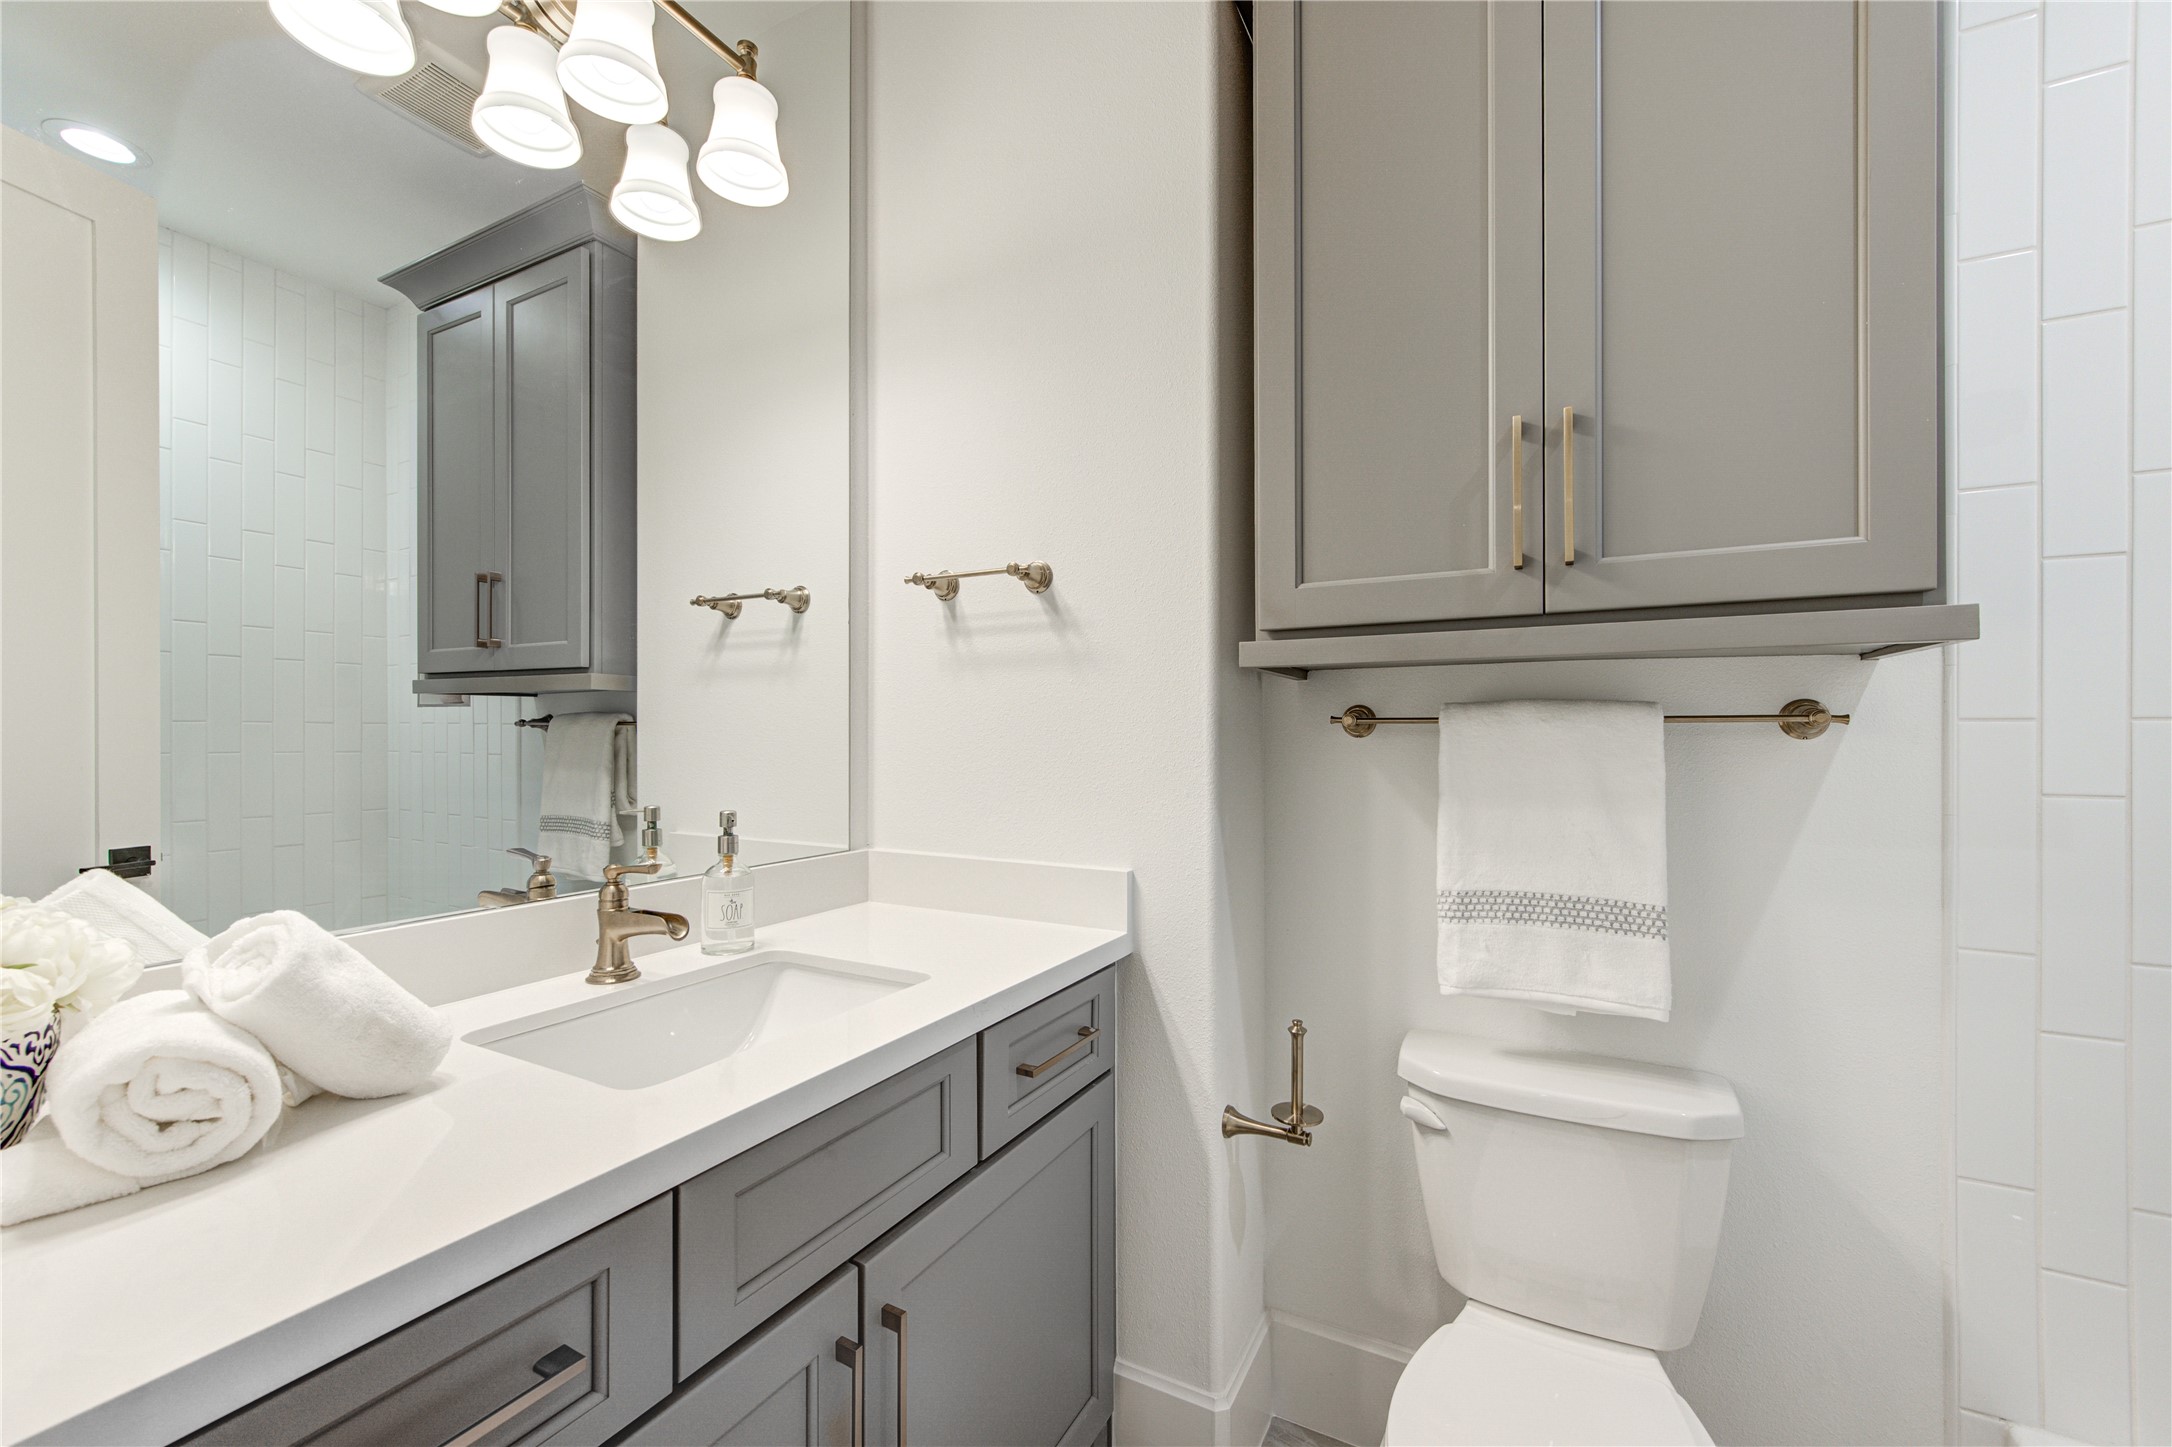 All 3 bathrooms on the second floor are designed with on-trend finishes.